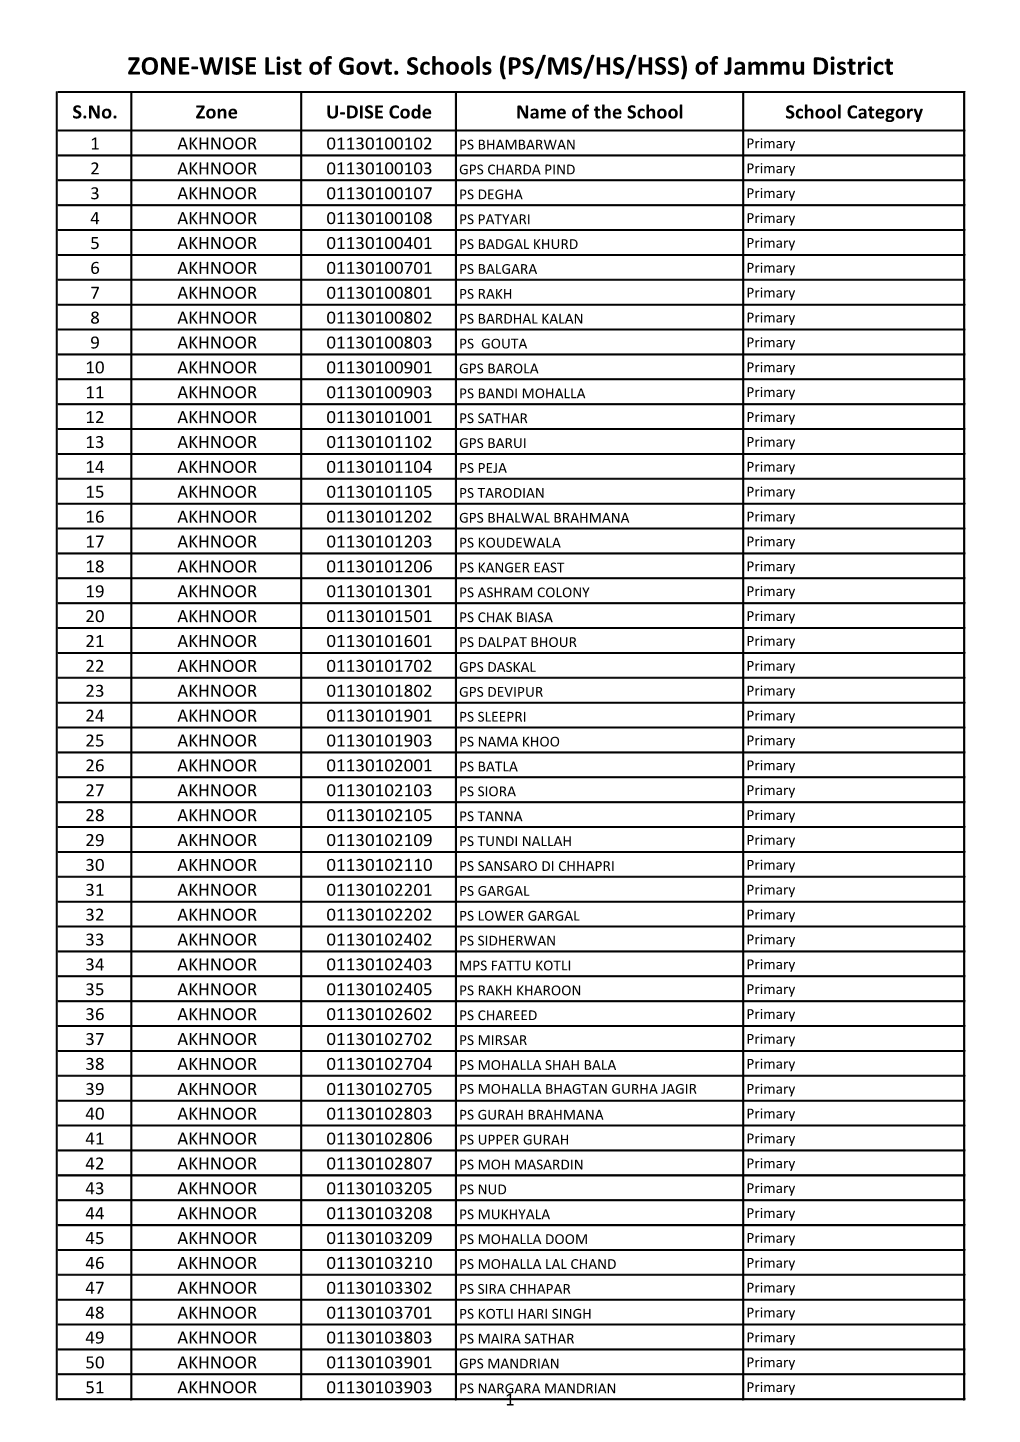 ZONE-WISE List of Govt. Schools (PS/MS/HS/HSS) of Jammu District